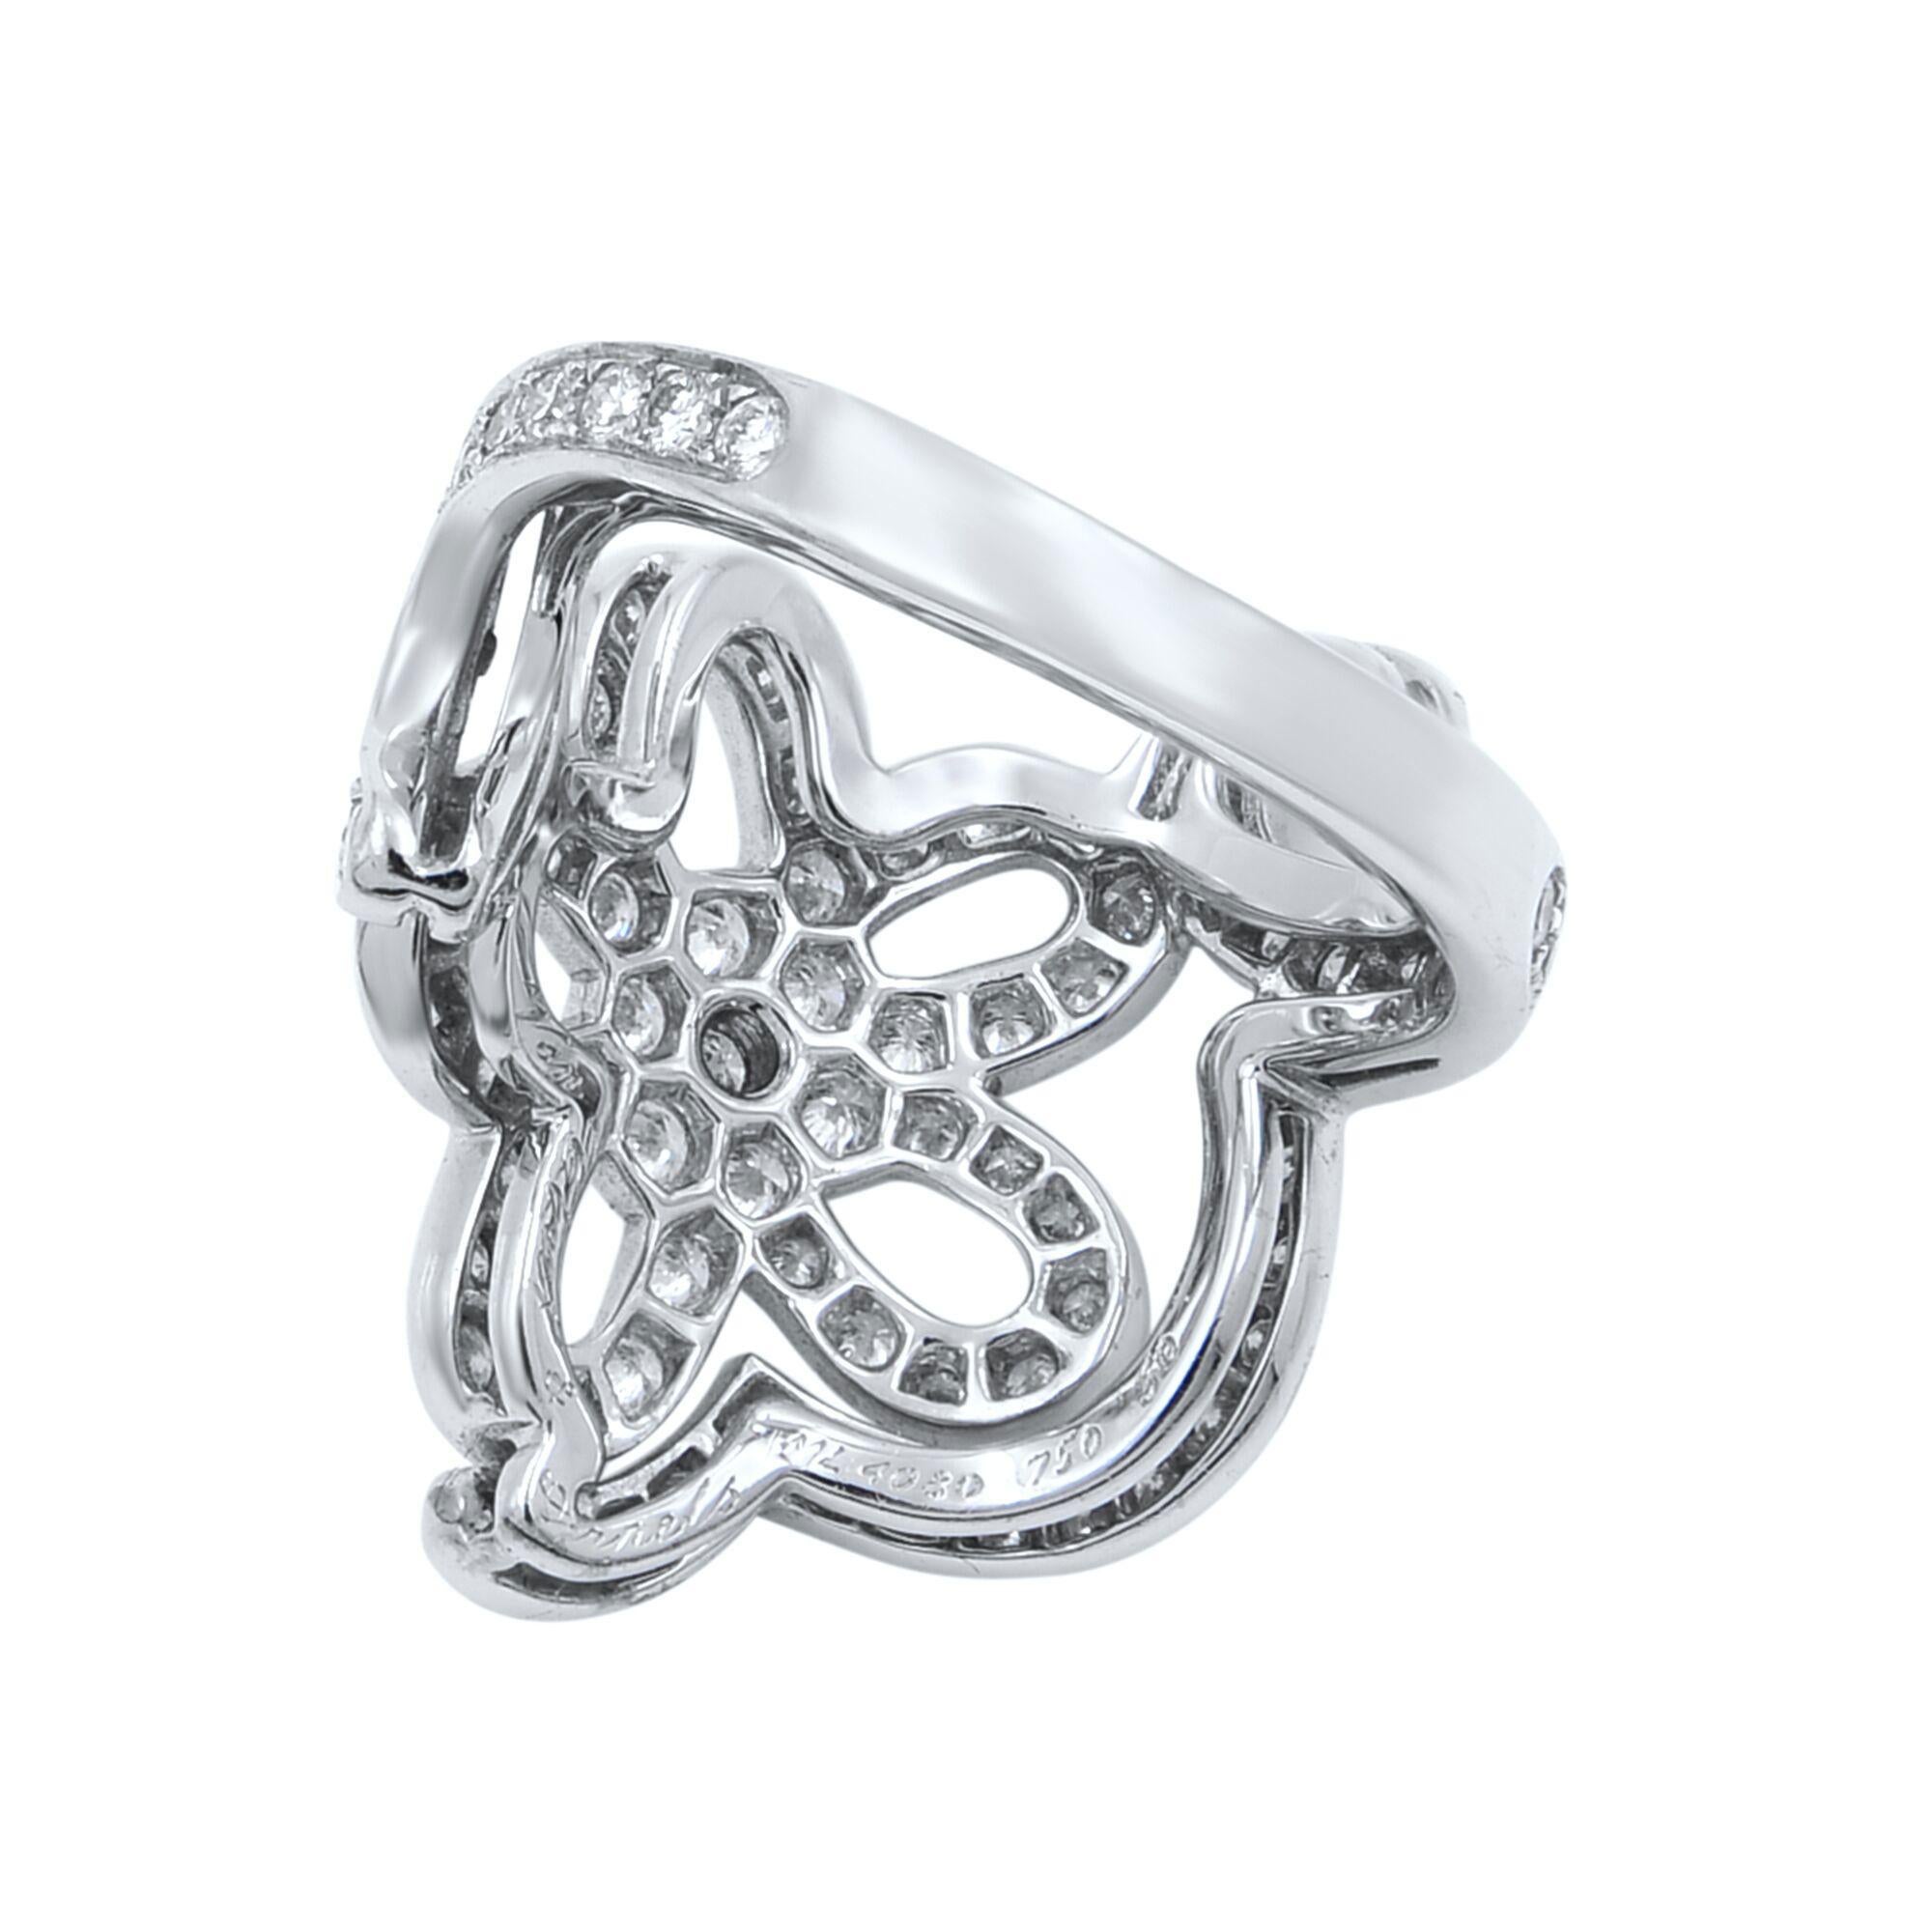 Van Cleef & Arpels Diamond Flower Cocktail Ring 18K White Gold 1.56Cttw Size 50 In Excellent Condition For Sale In New York, NY